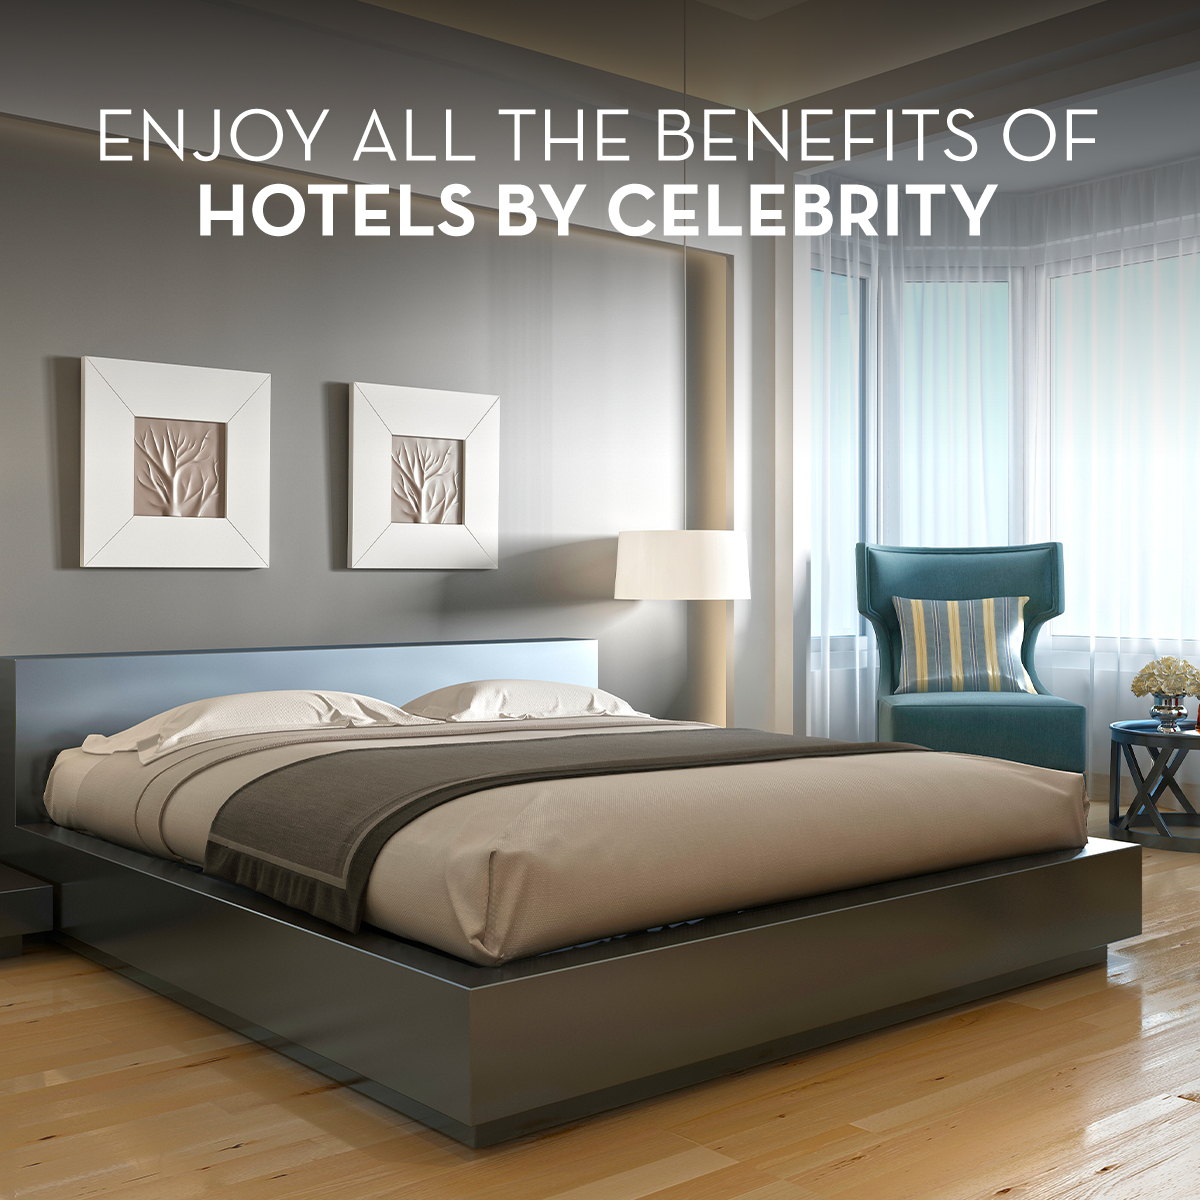 HOTELS BY CELEBRITY